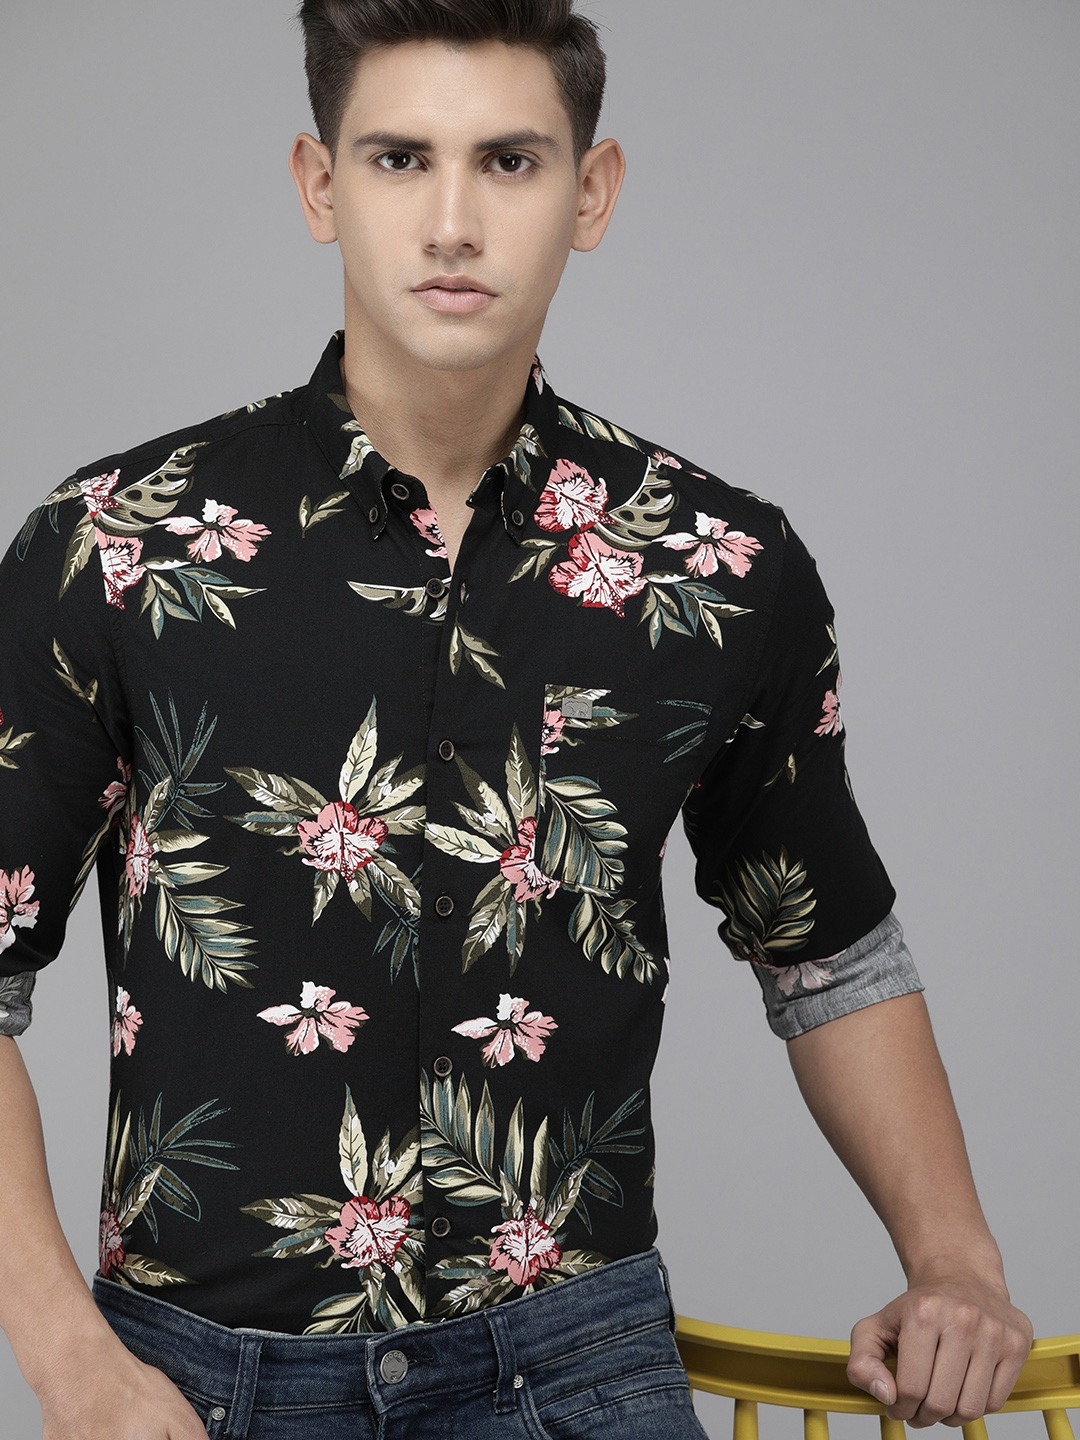 The Bear House | The Bear House Men Black Floral Printed Slim Fit Casual Shirt